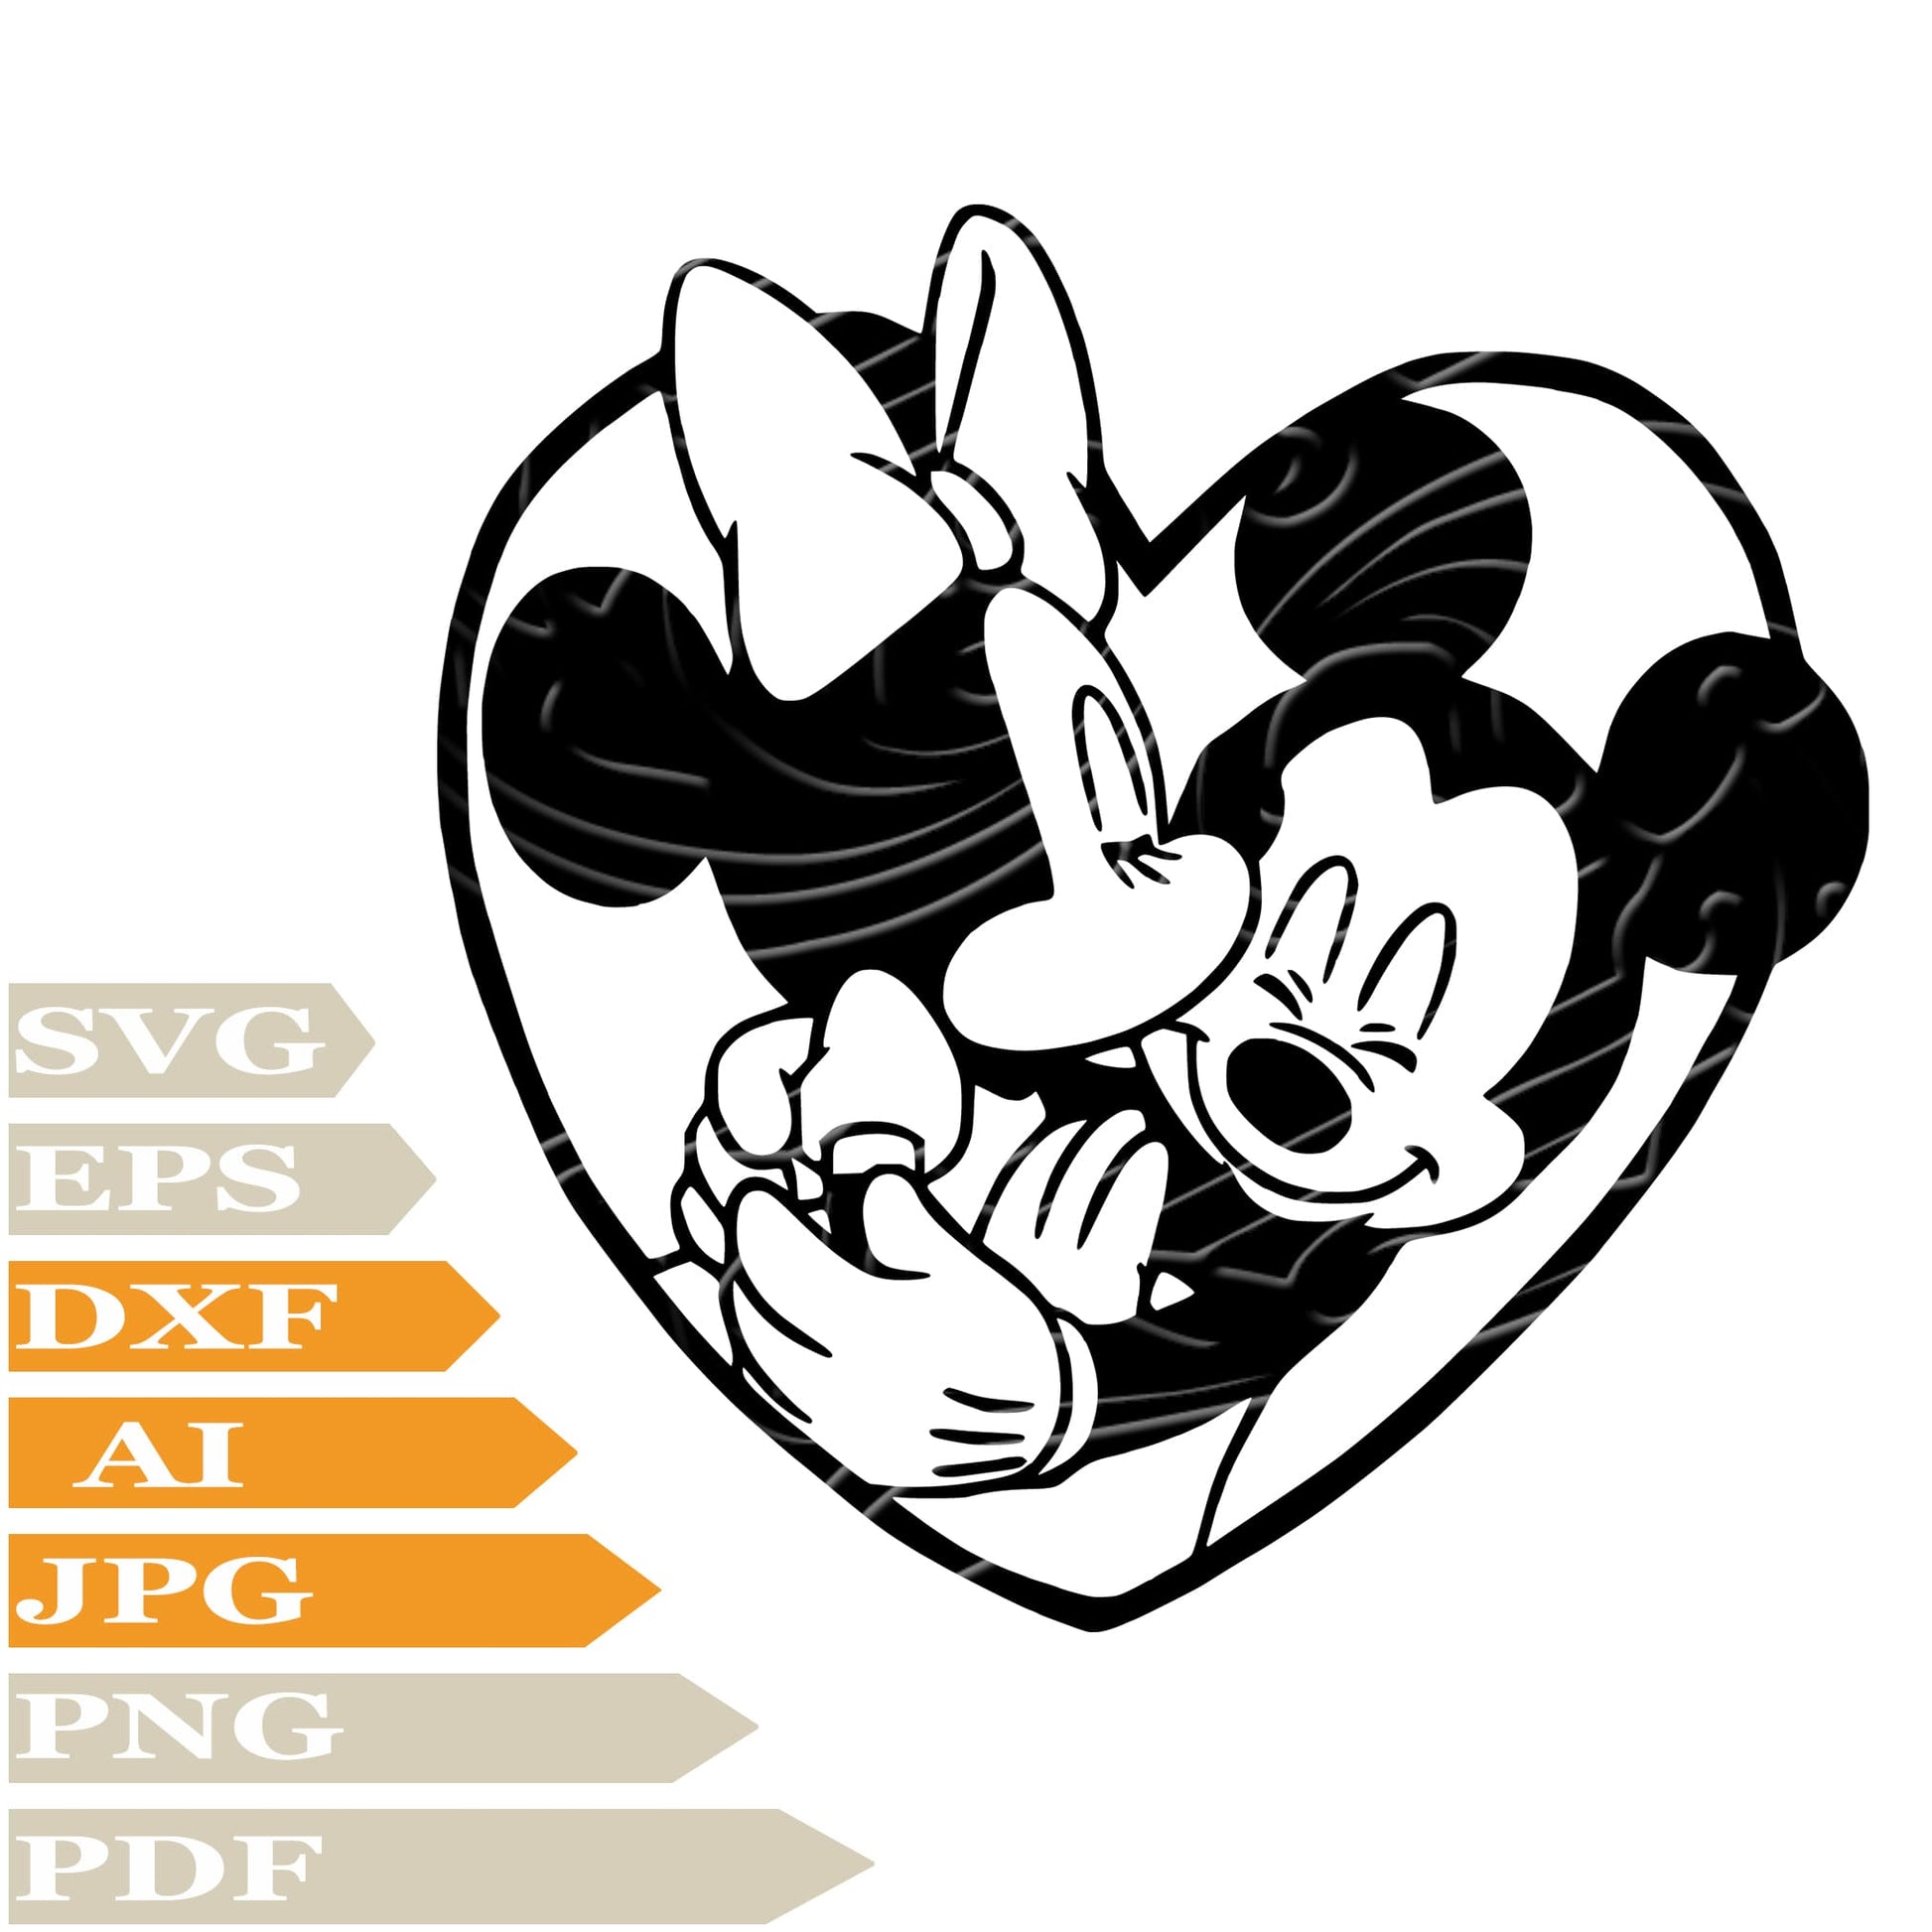 Mickey Minnie Mause, Miinnie Mickey Mause  In Heart Svg File, Image Cut, Png, For Tattoo, Silhouette, Digital Vector Download, Cut File, Clipart, For Cricut